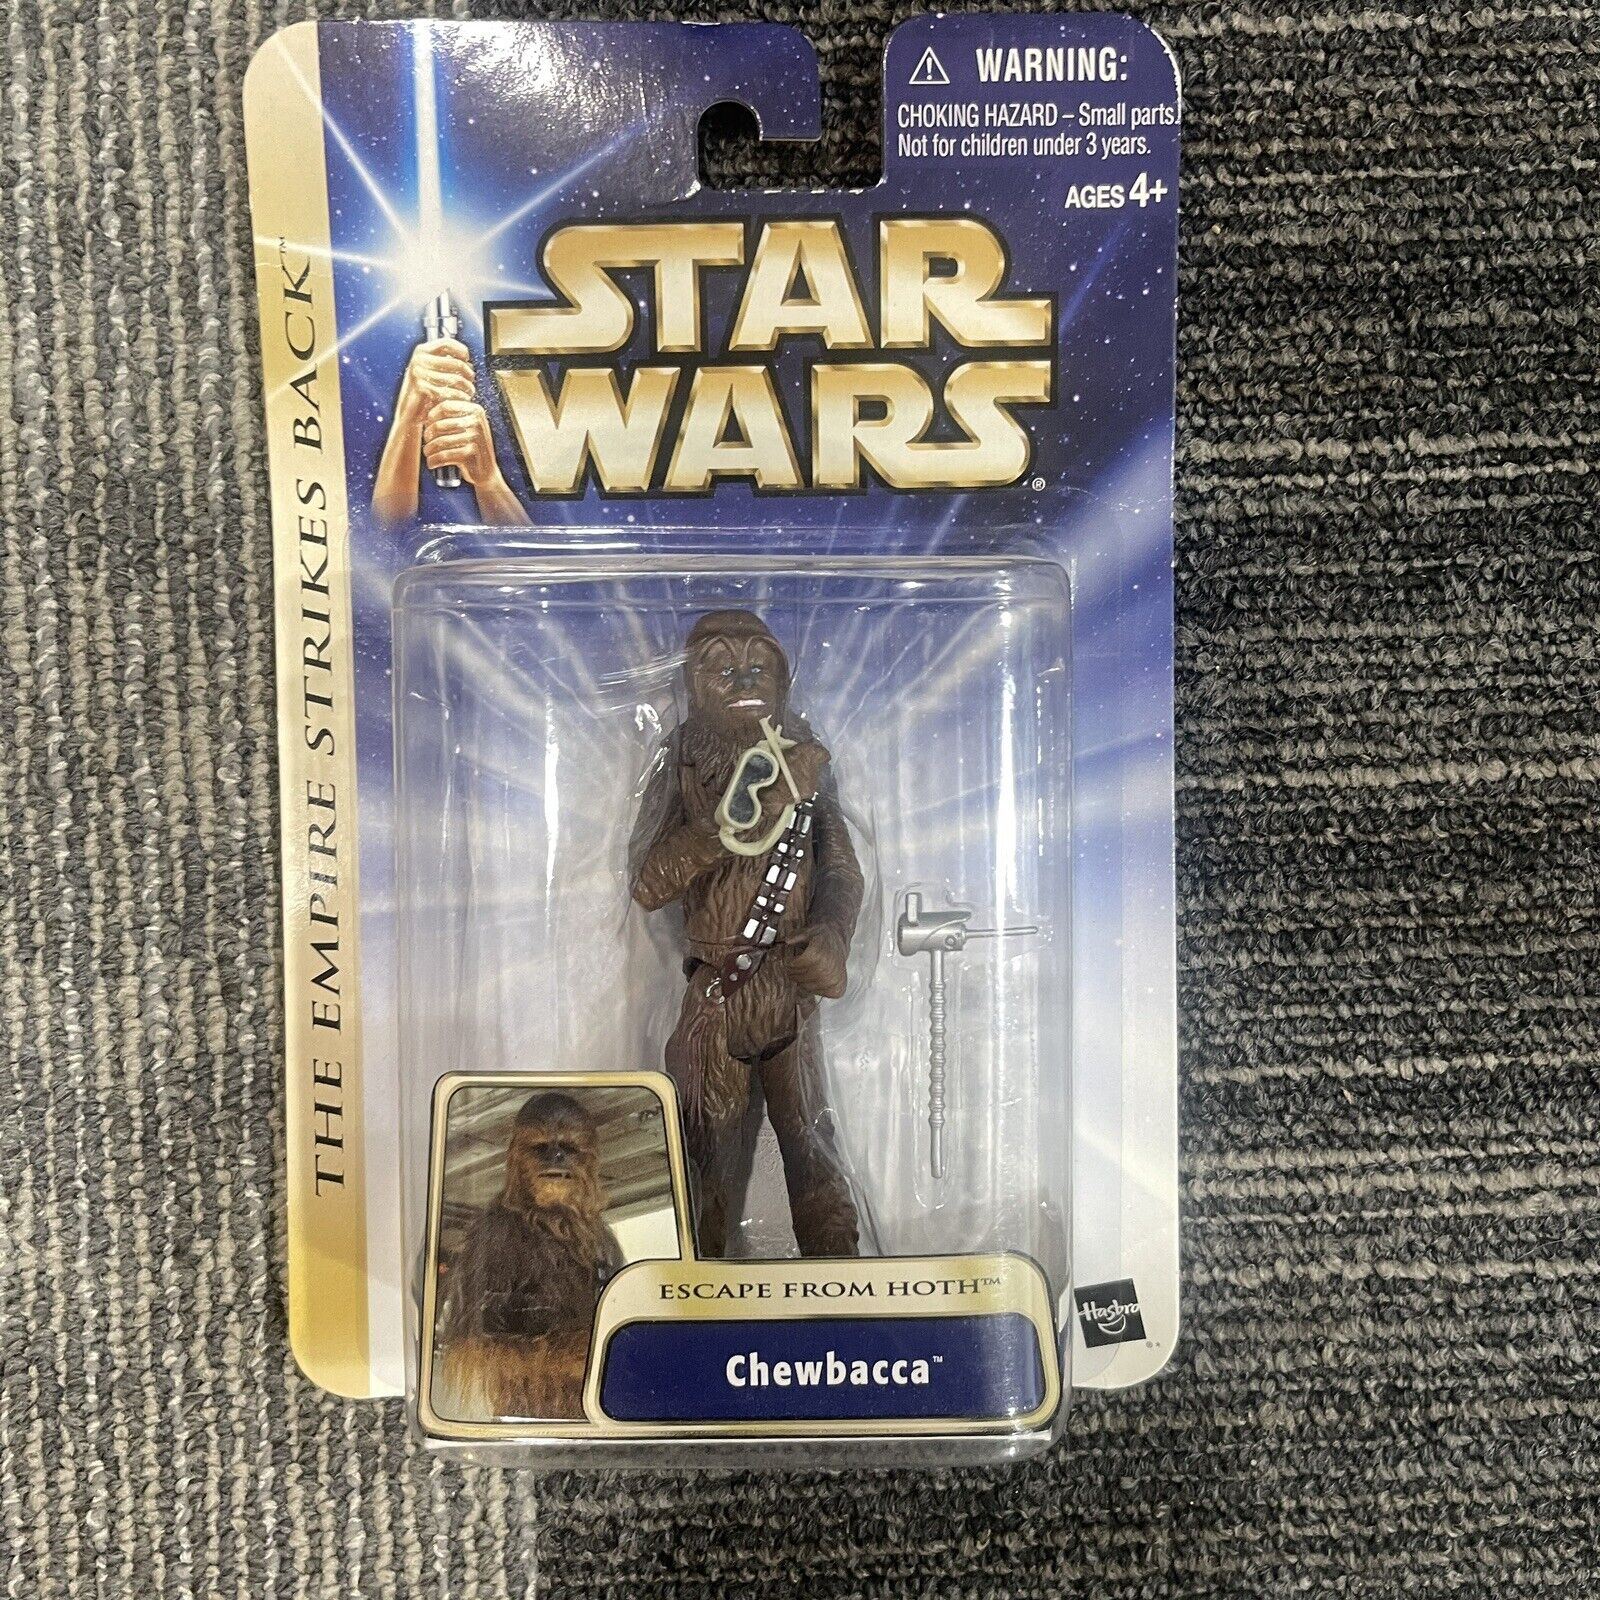 Hasbro Star Wars Empire Strikes Back Chewbacca Escape from Hoth Action Figure